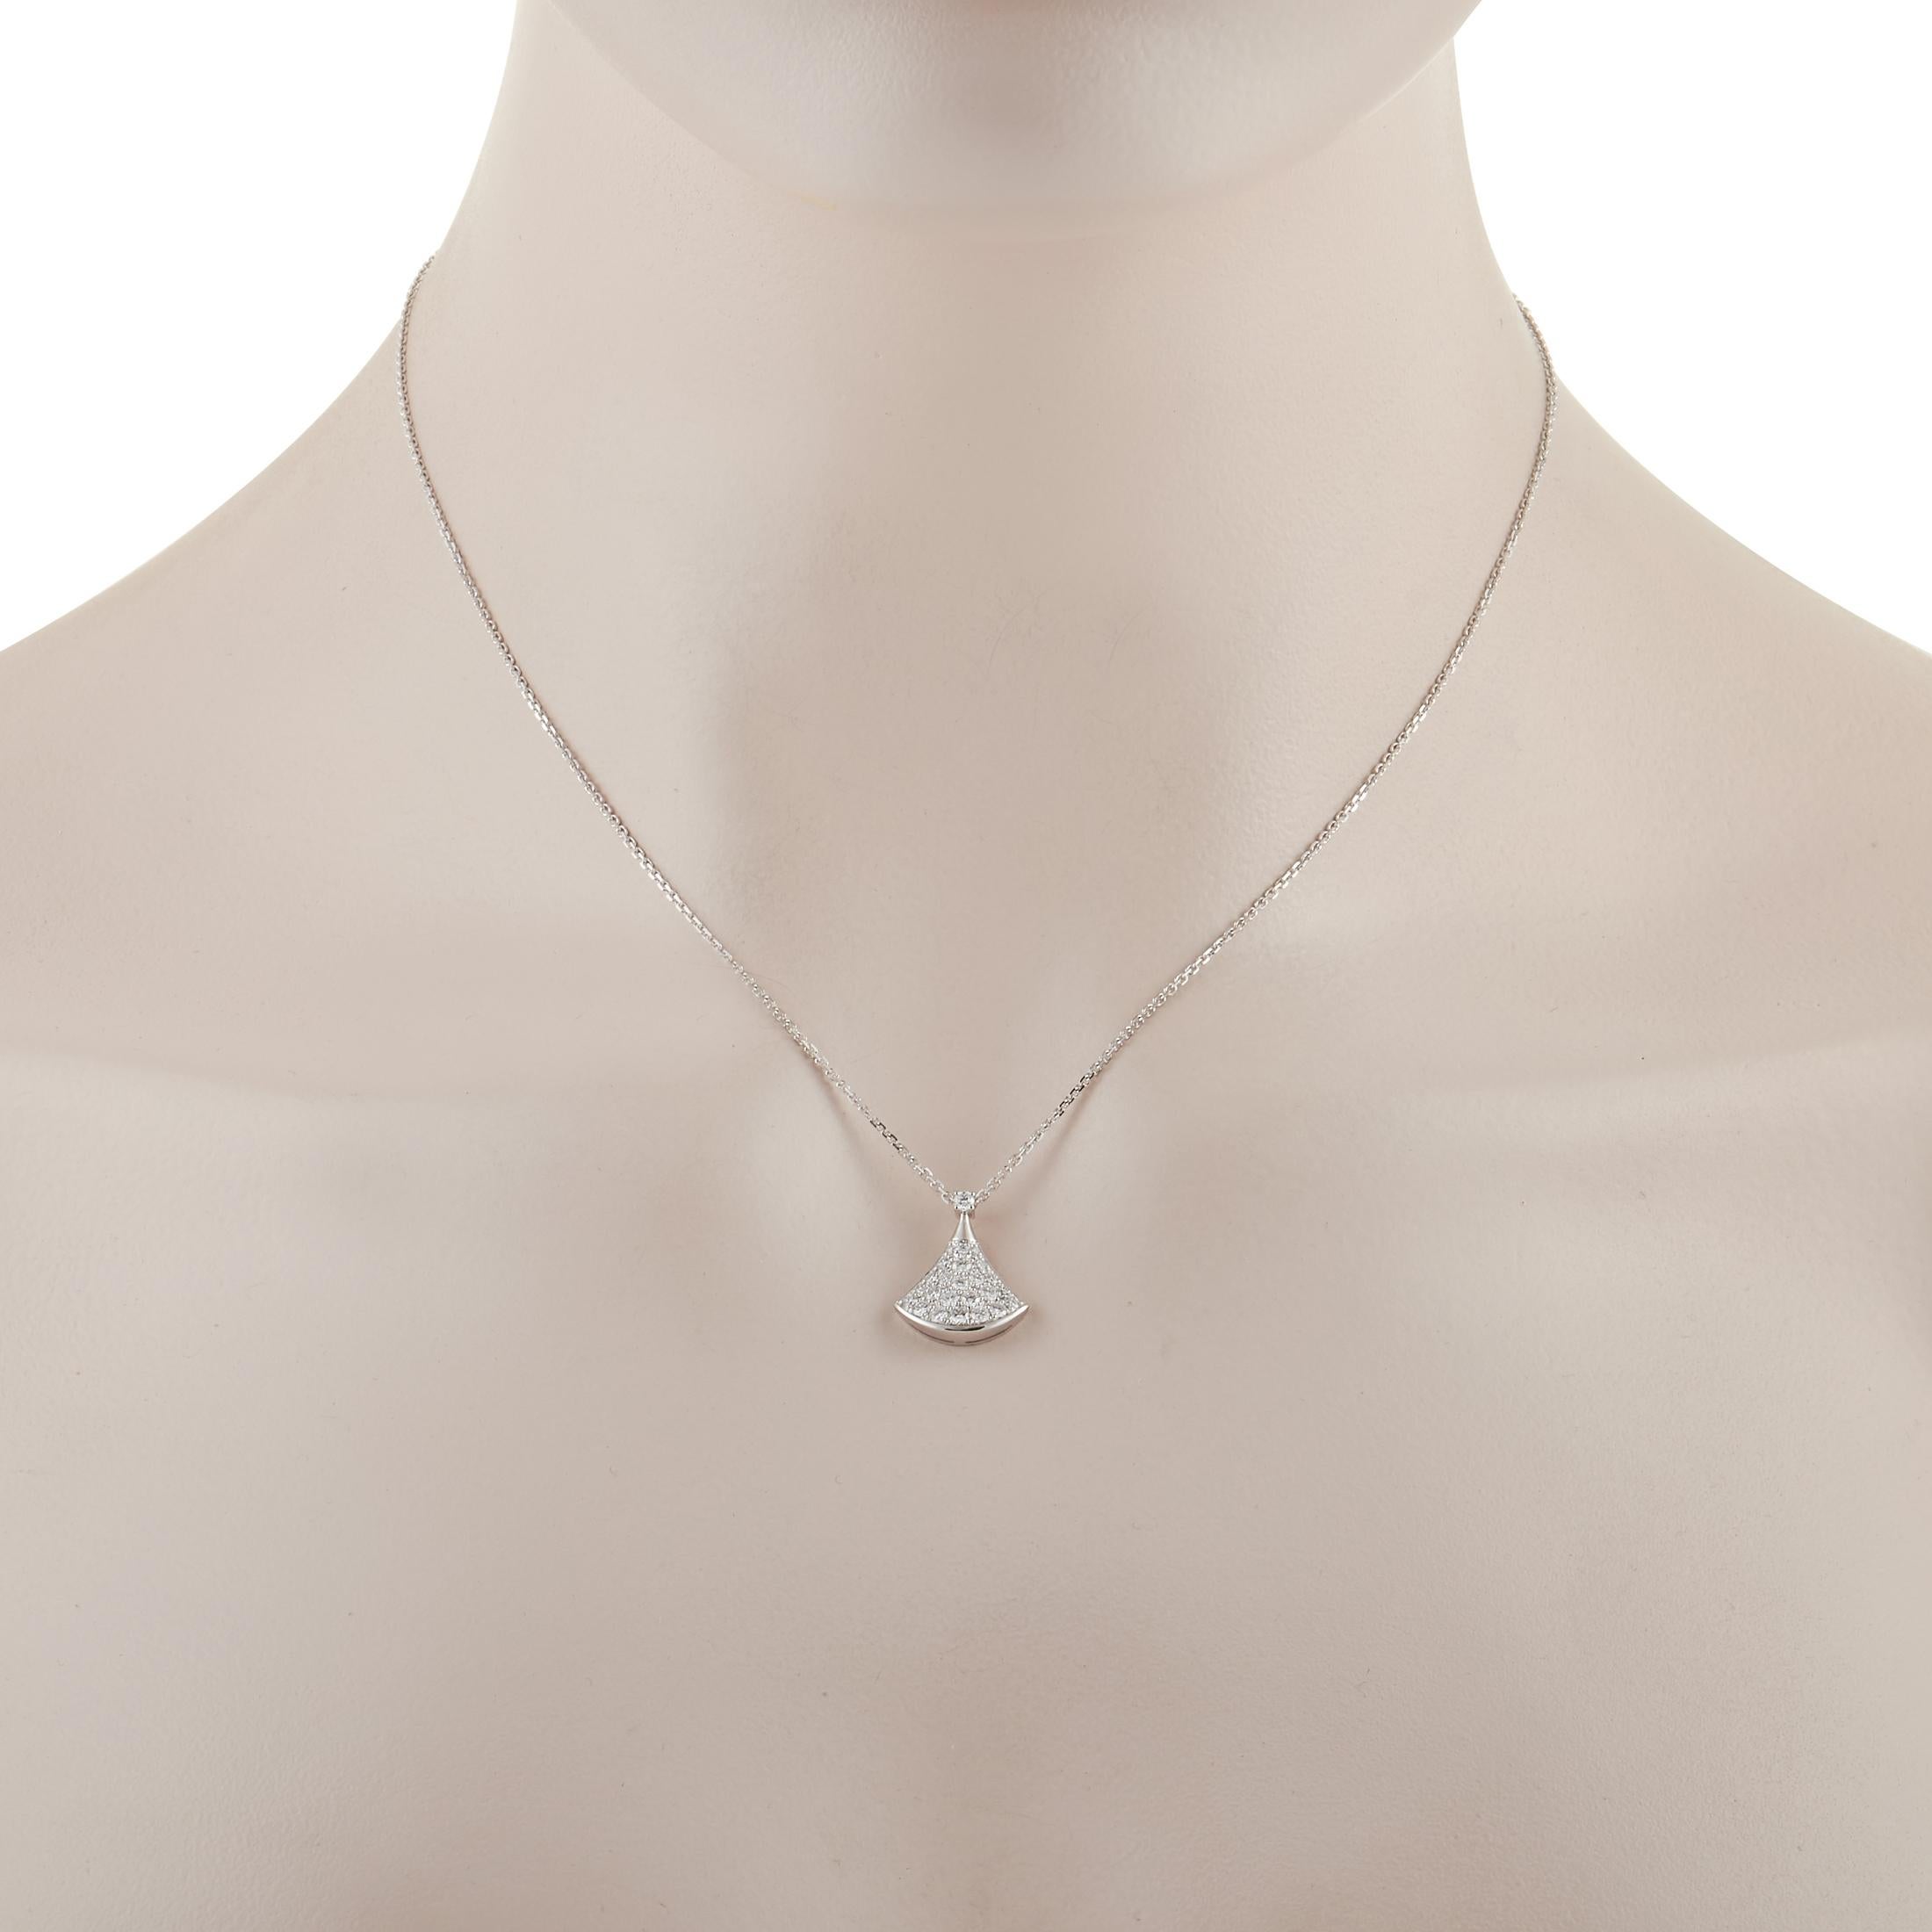 This Divas Dream pendant necklace from Bvlgari is a stunning piece that is simple, elegant, and scintillating. Attached to a 16.5” chain, you’ll find a striking 18K White Gold pendant measuring .63” wide and .5” long that shines to life thanks to an